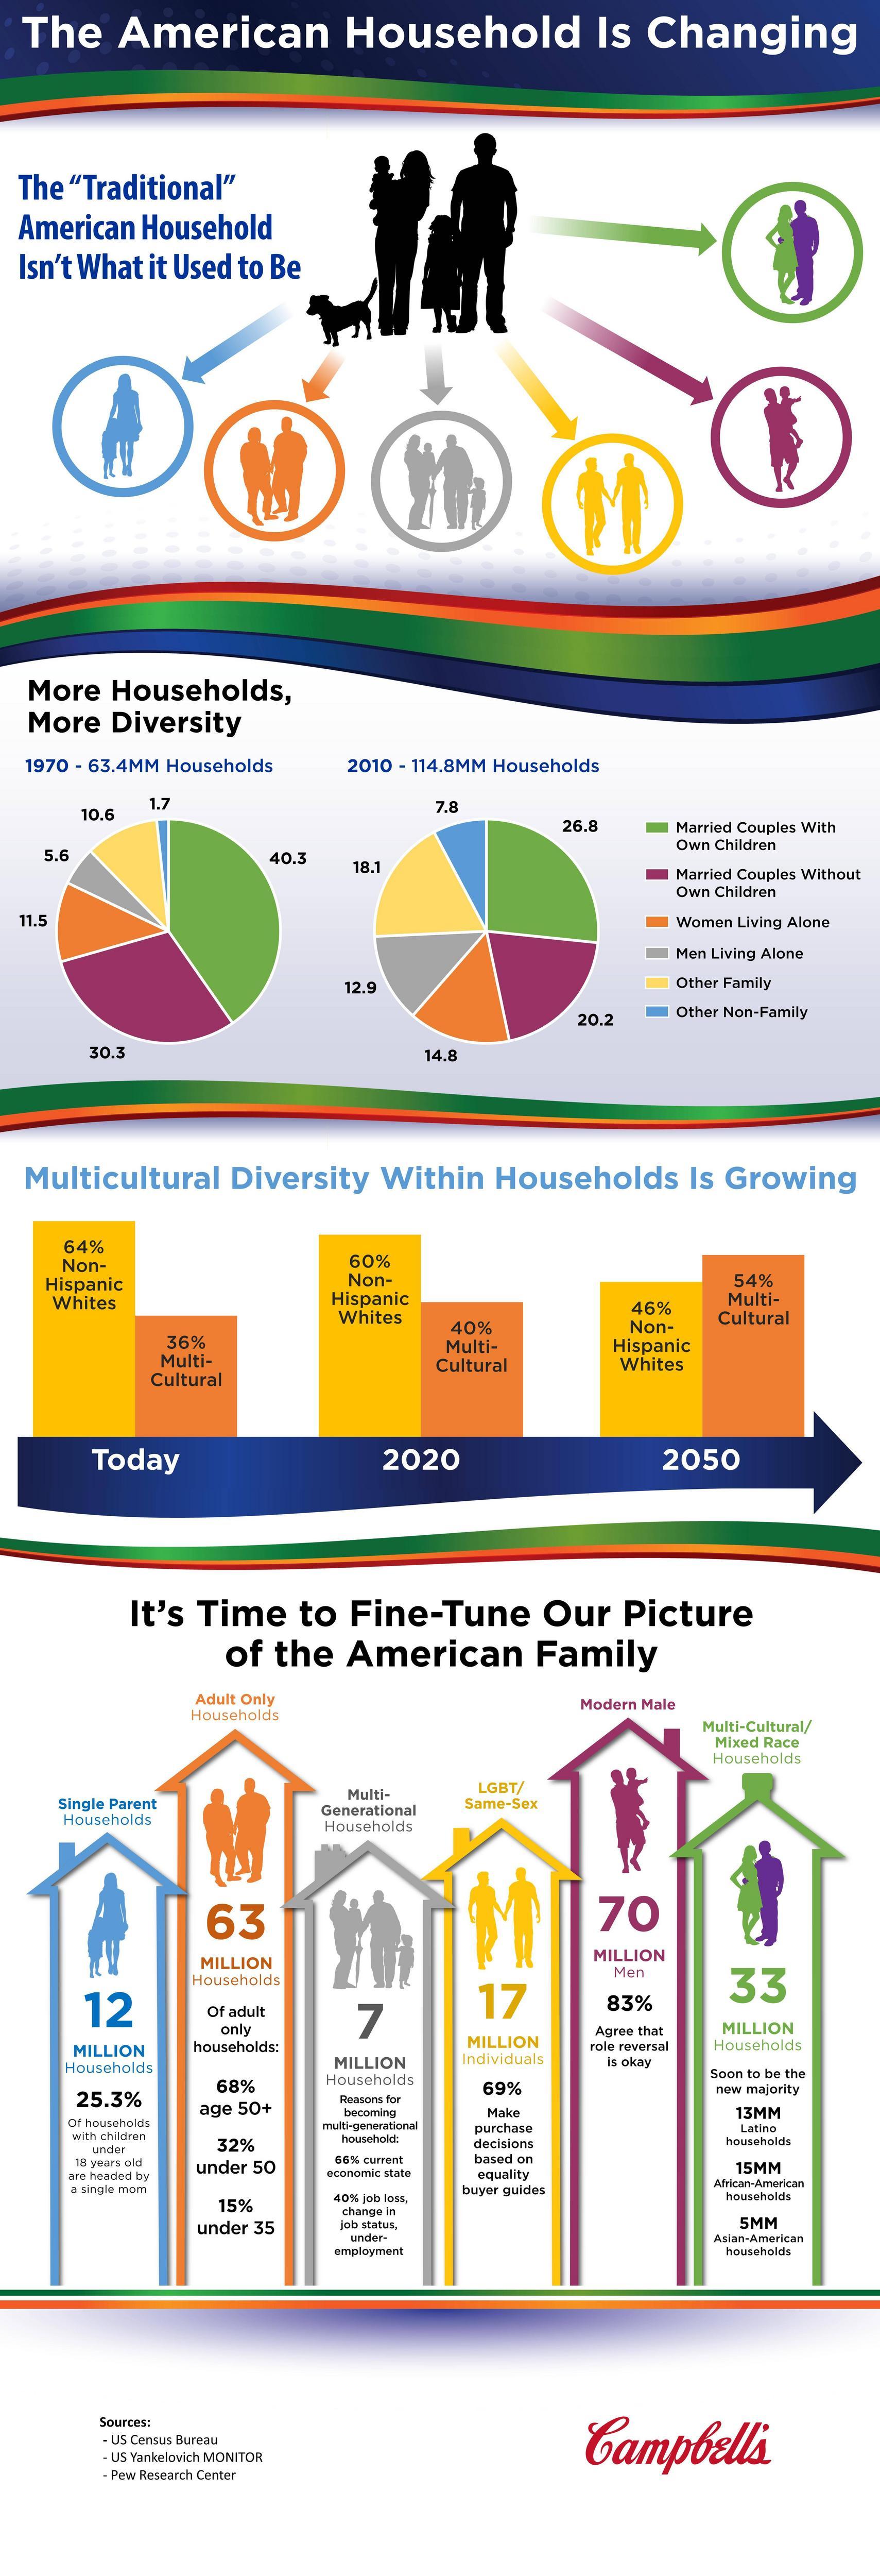 Campbell Company Logo - The Changing American Household Infographic. Campbell Soup Company